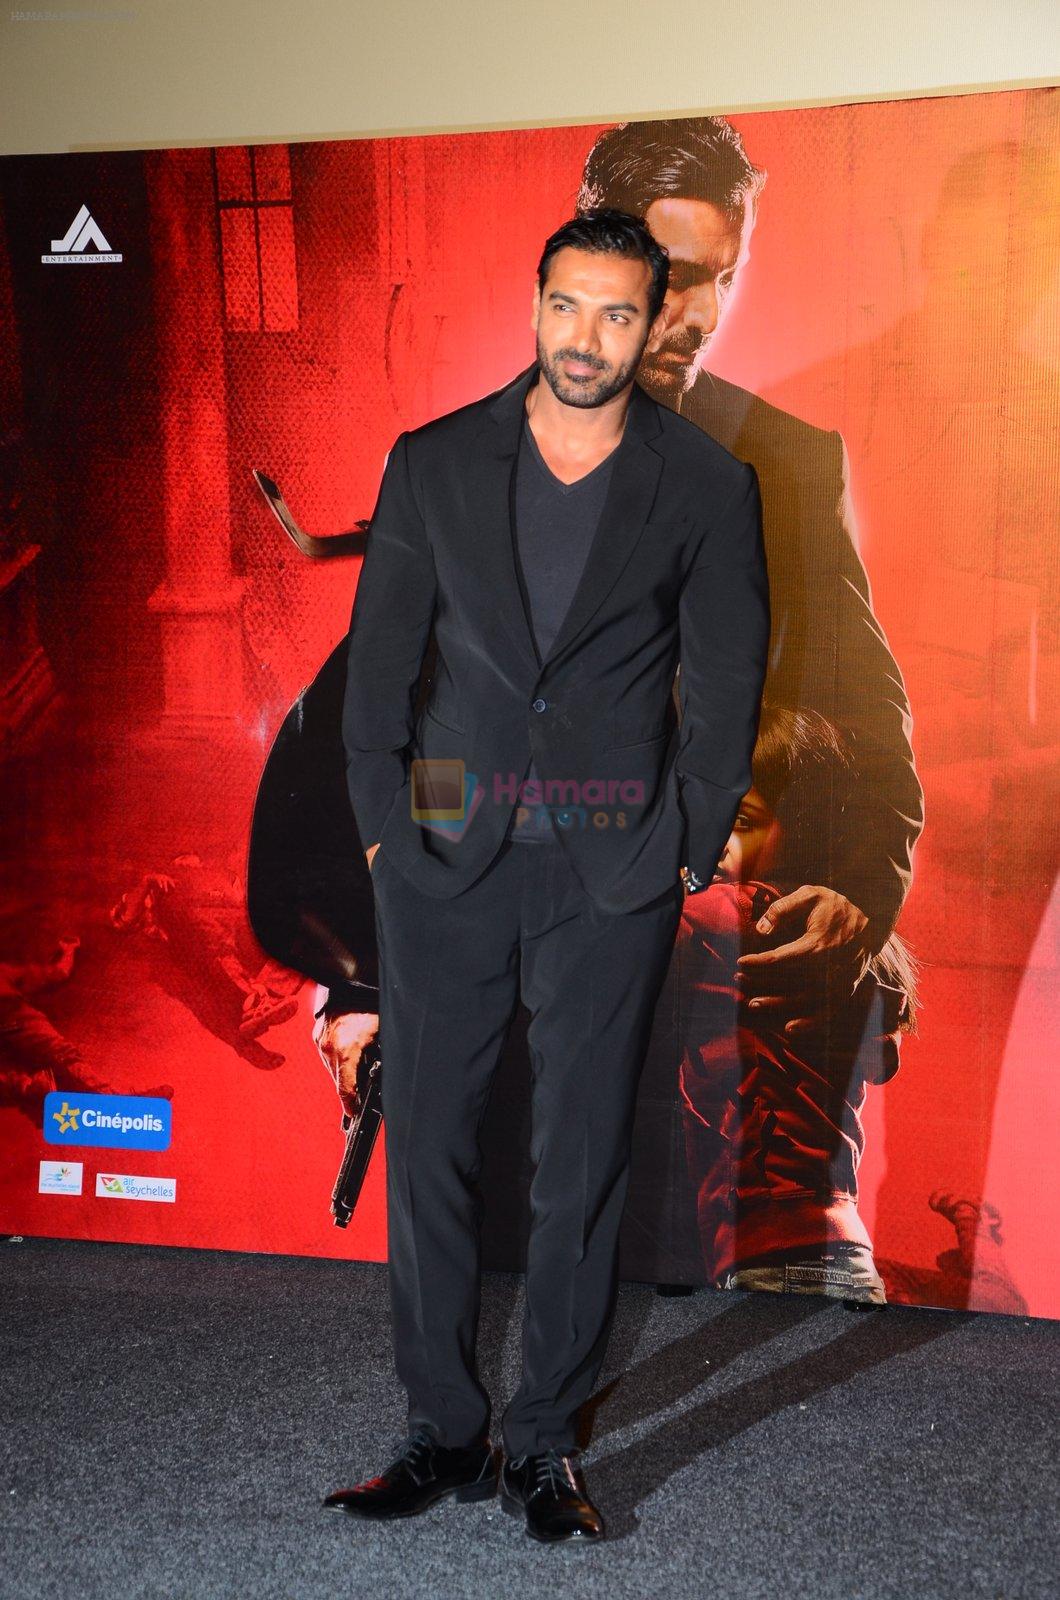 John Abraham at Rocky Handsome trailer launch on 3rd March 2016